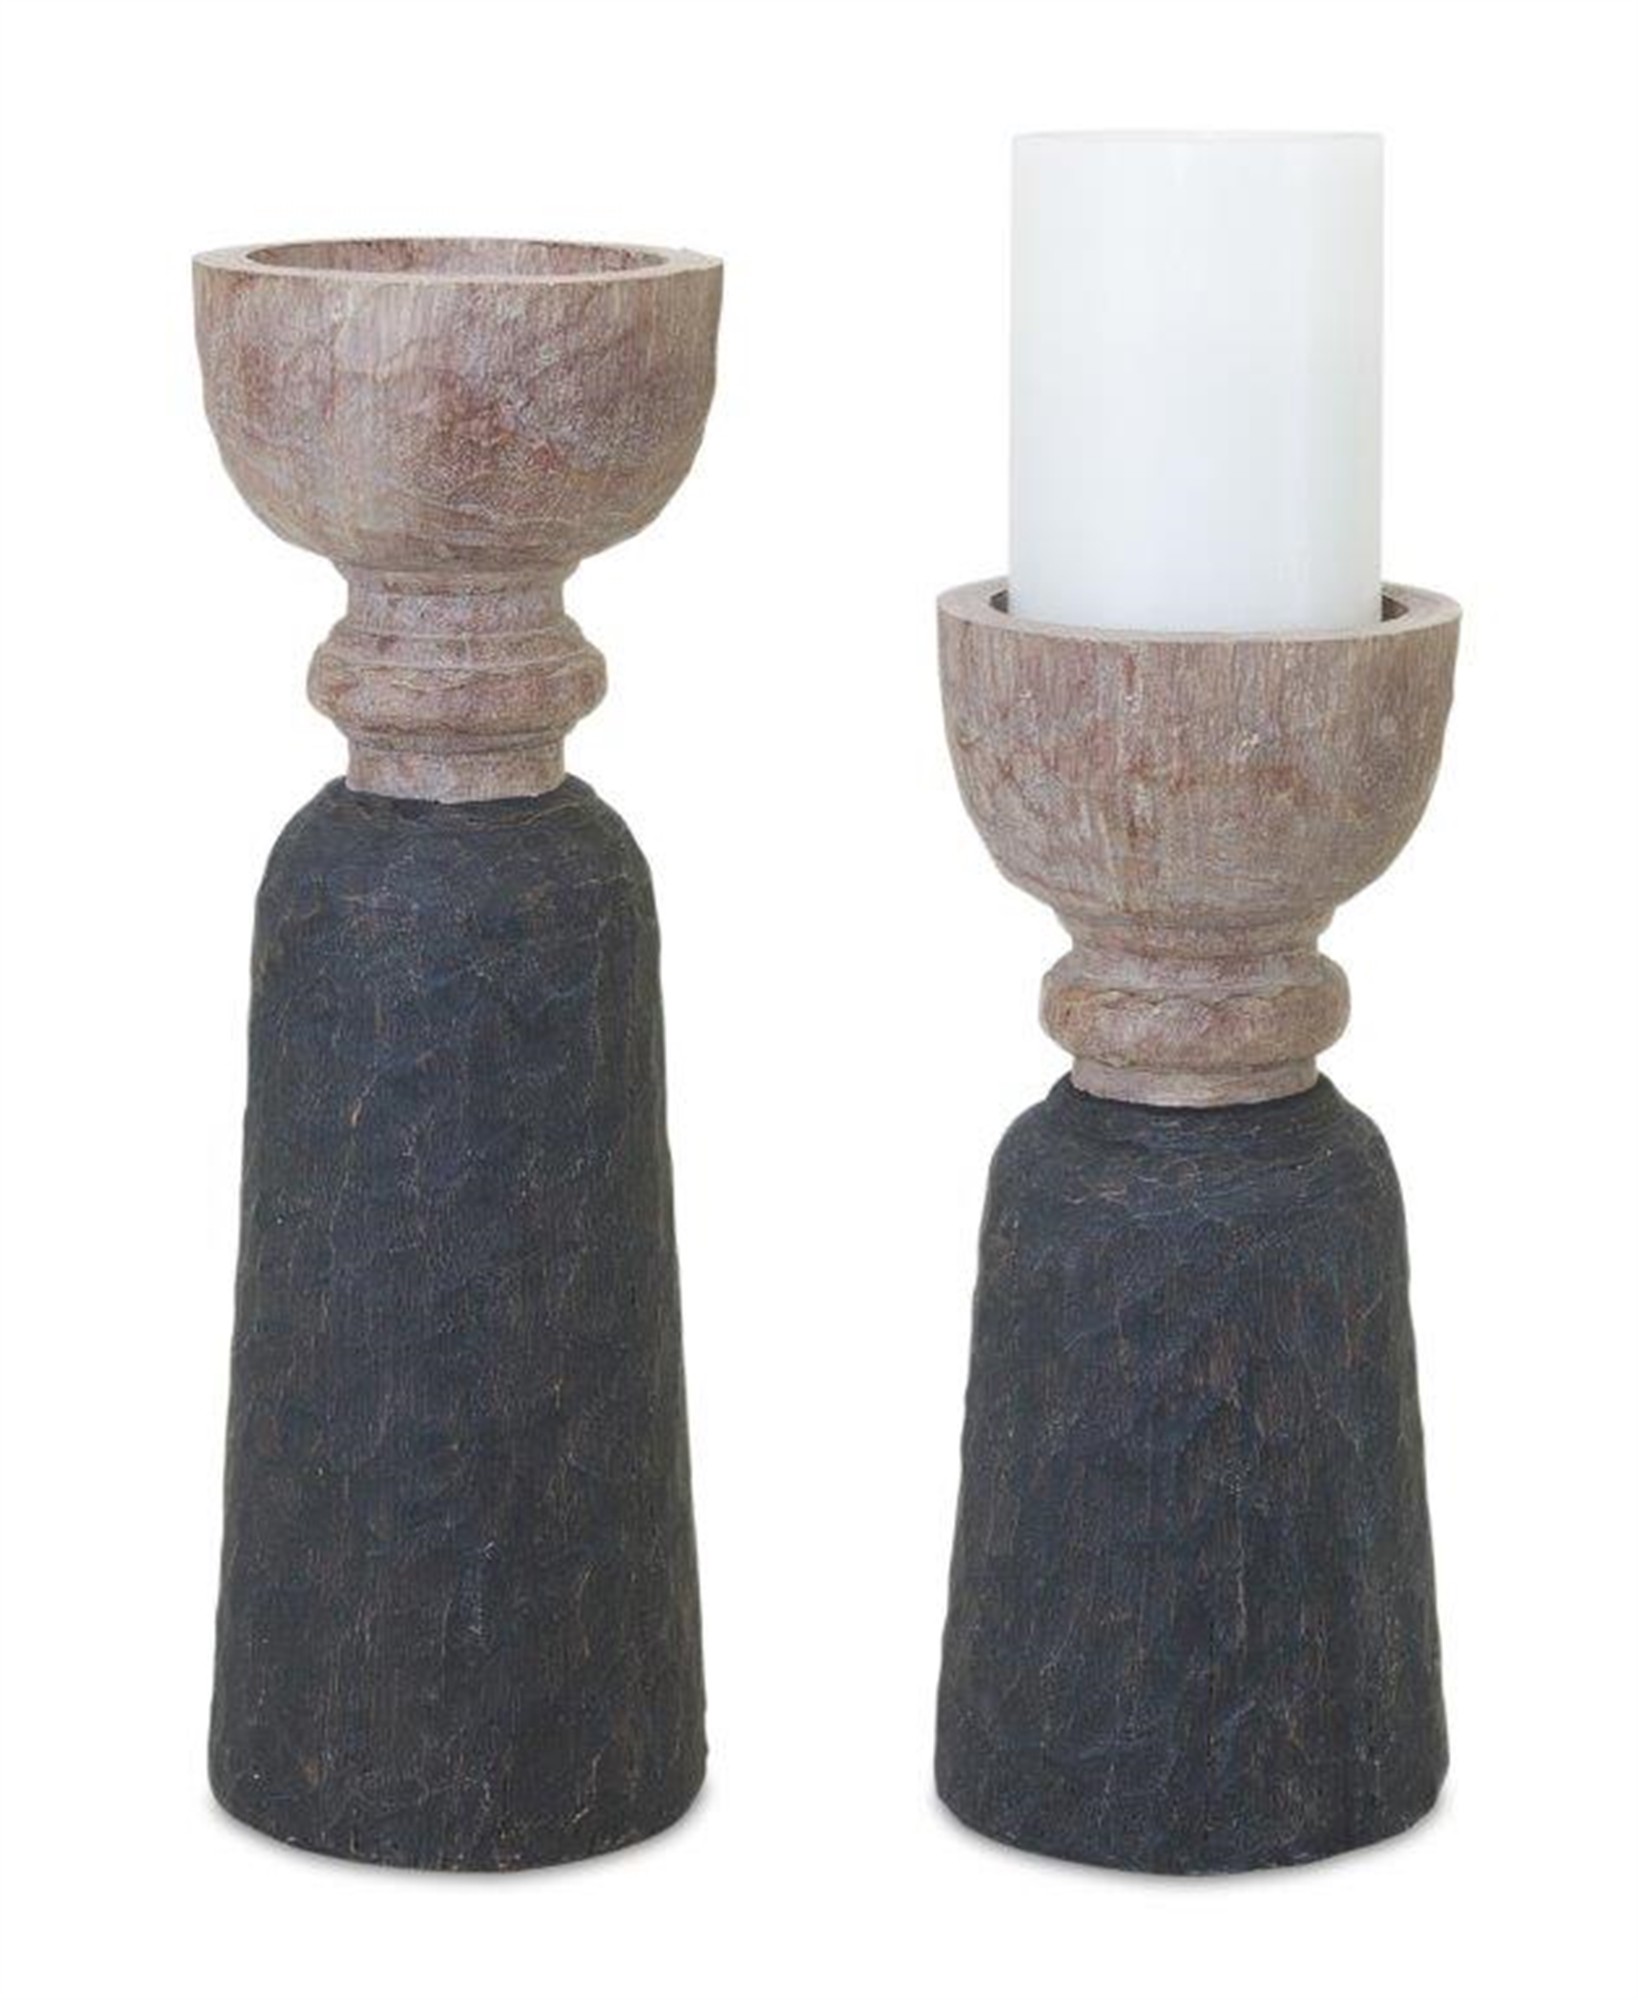 Candle Holder (Set of 2) 10"H, 12.5"H Resin